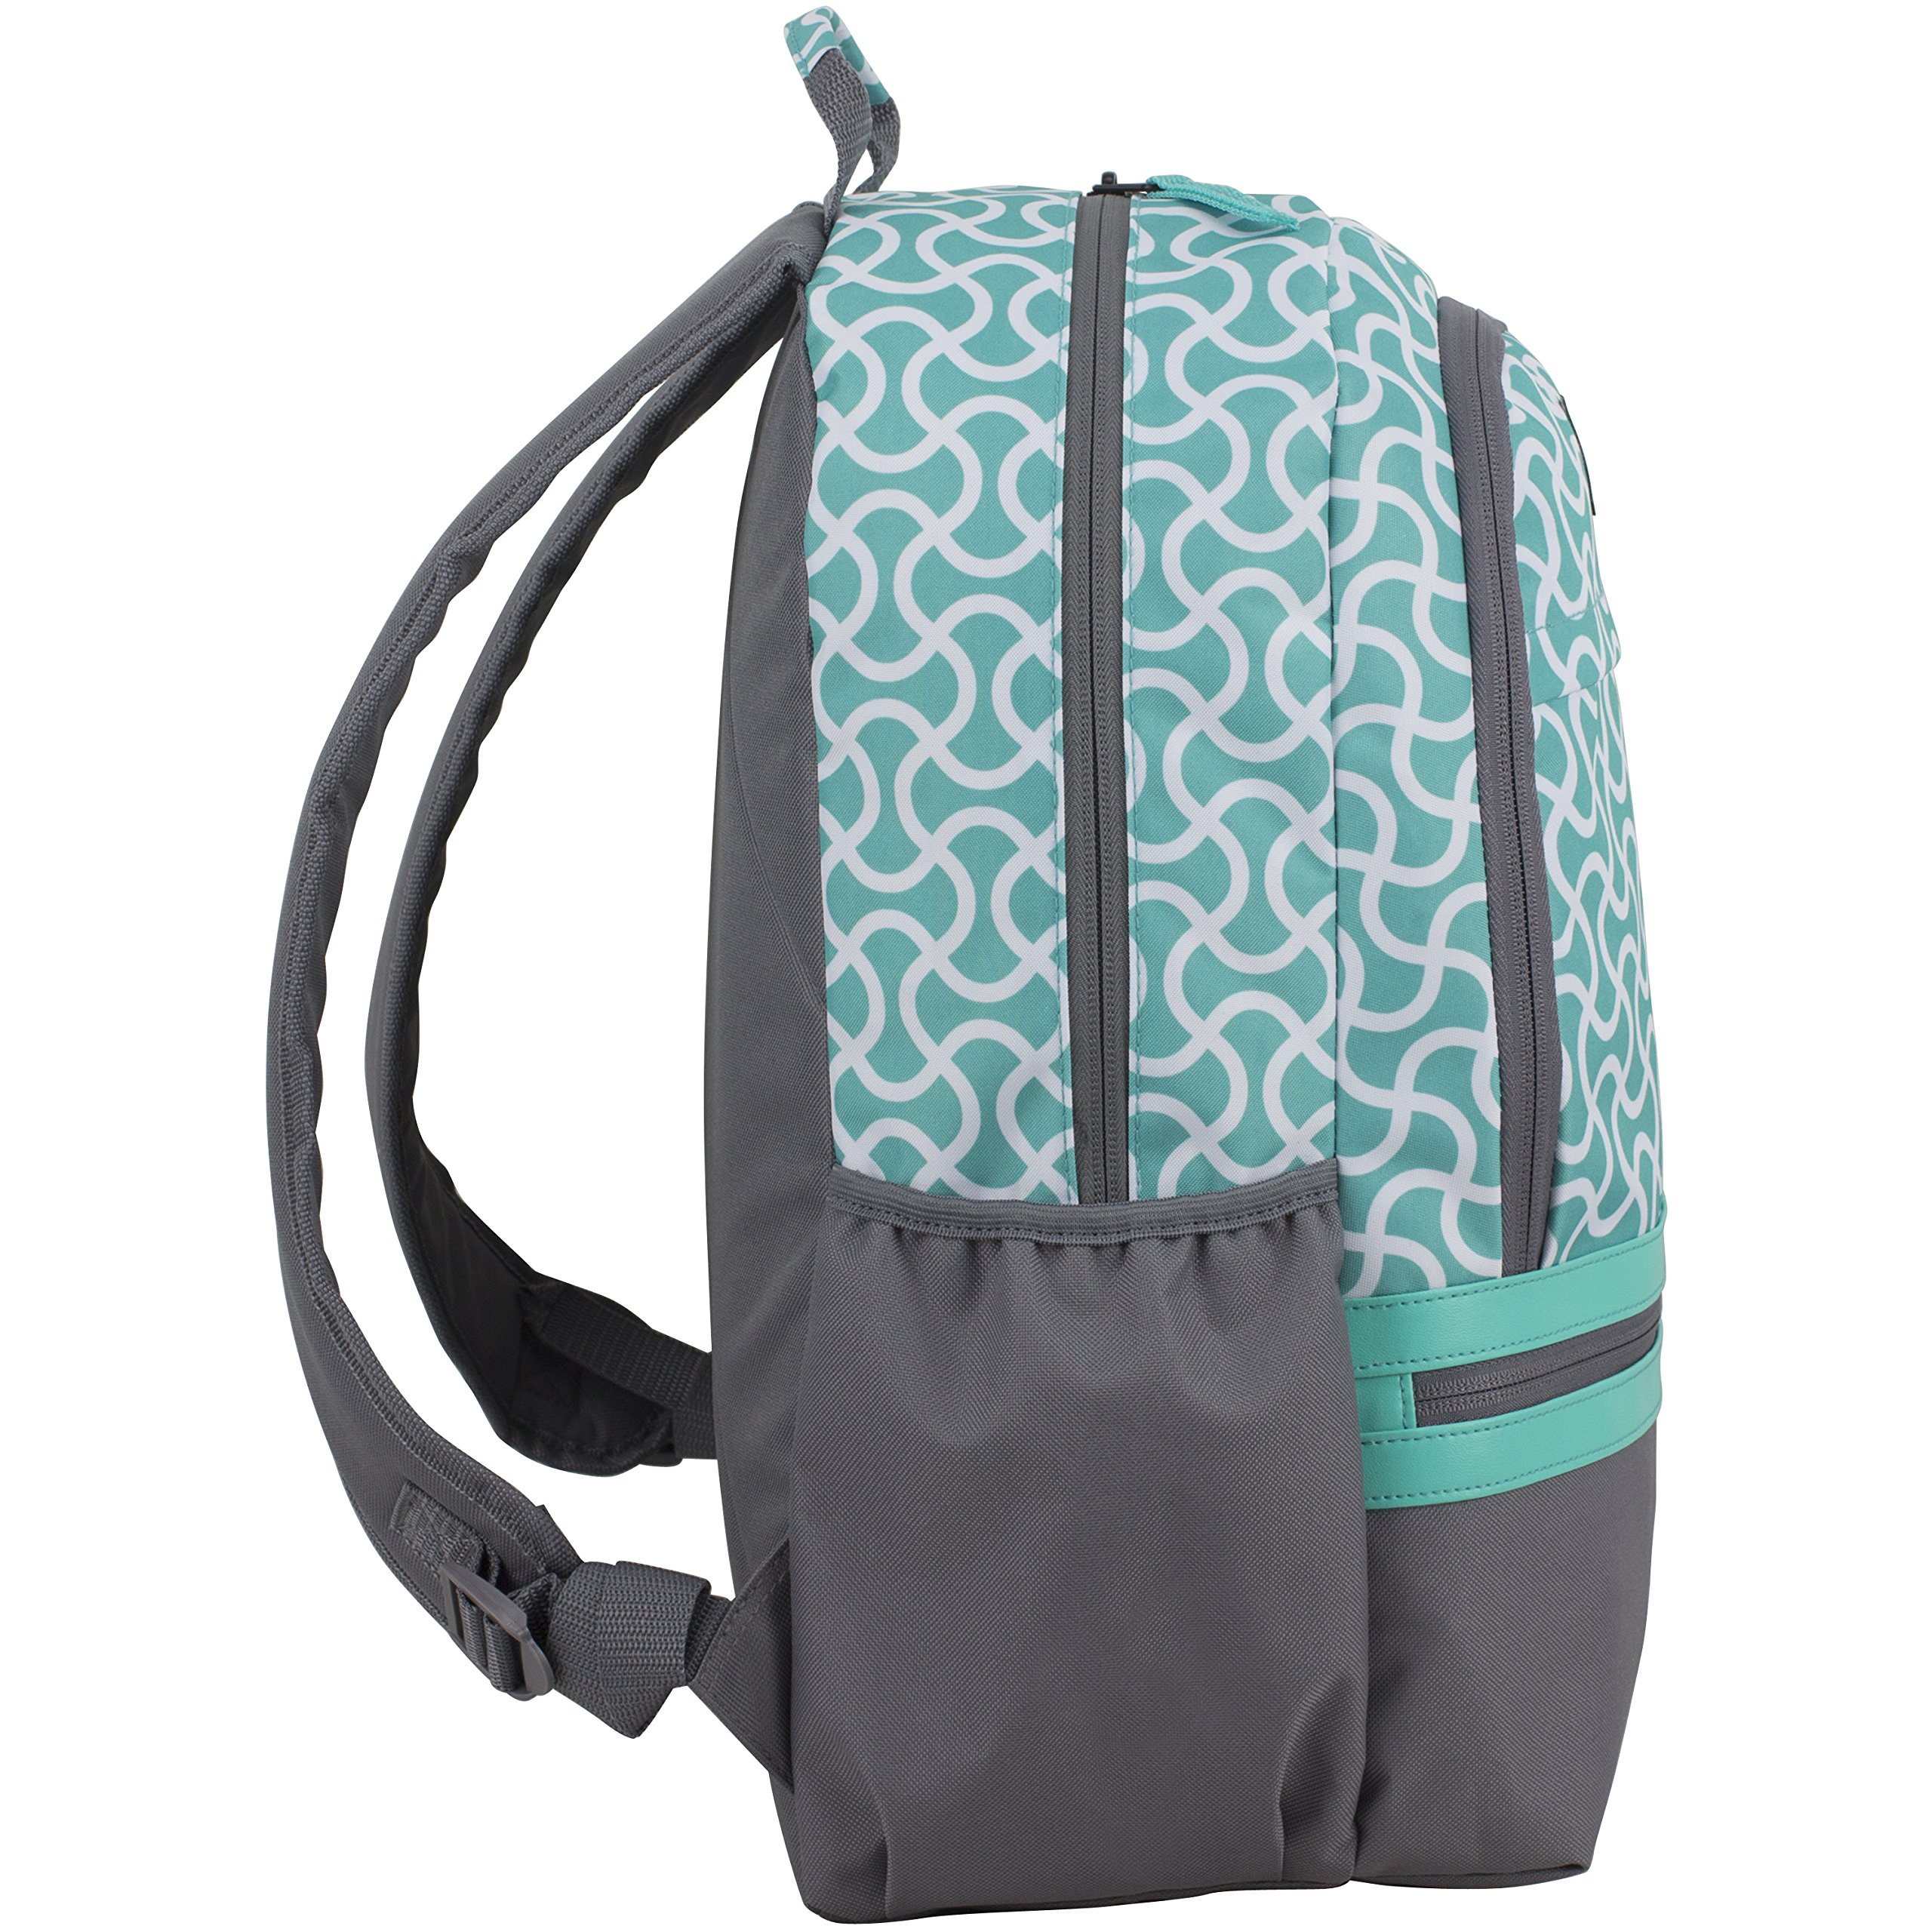 FUEL Ultimate Concept Backpack, Turquoise/Ash Gray/Squiggle Textile Print